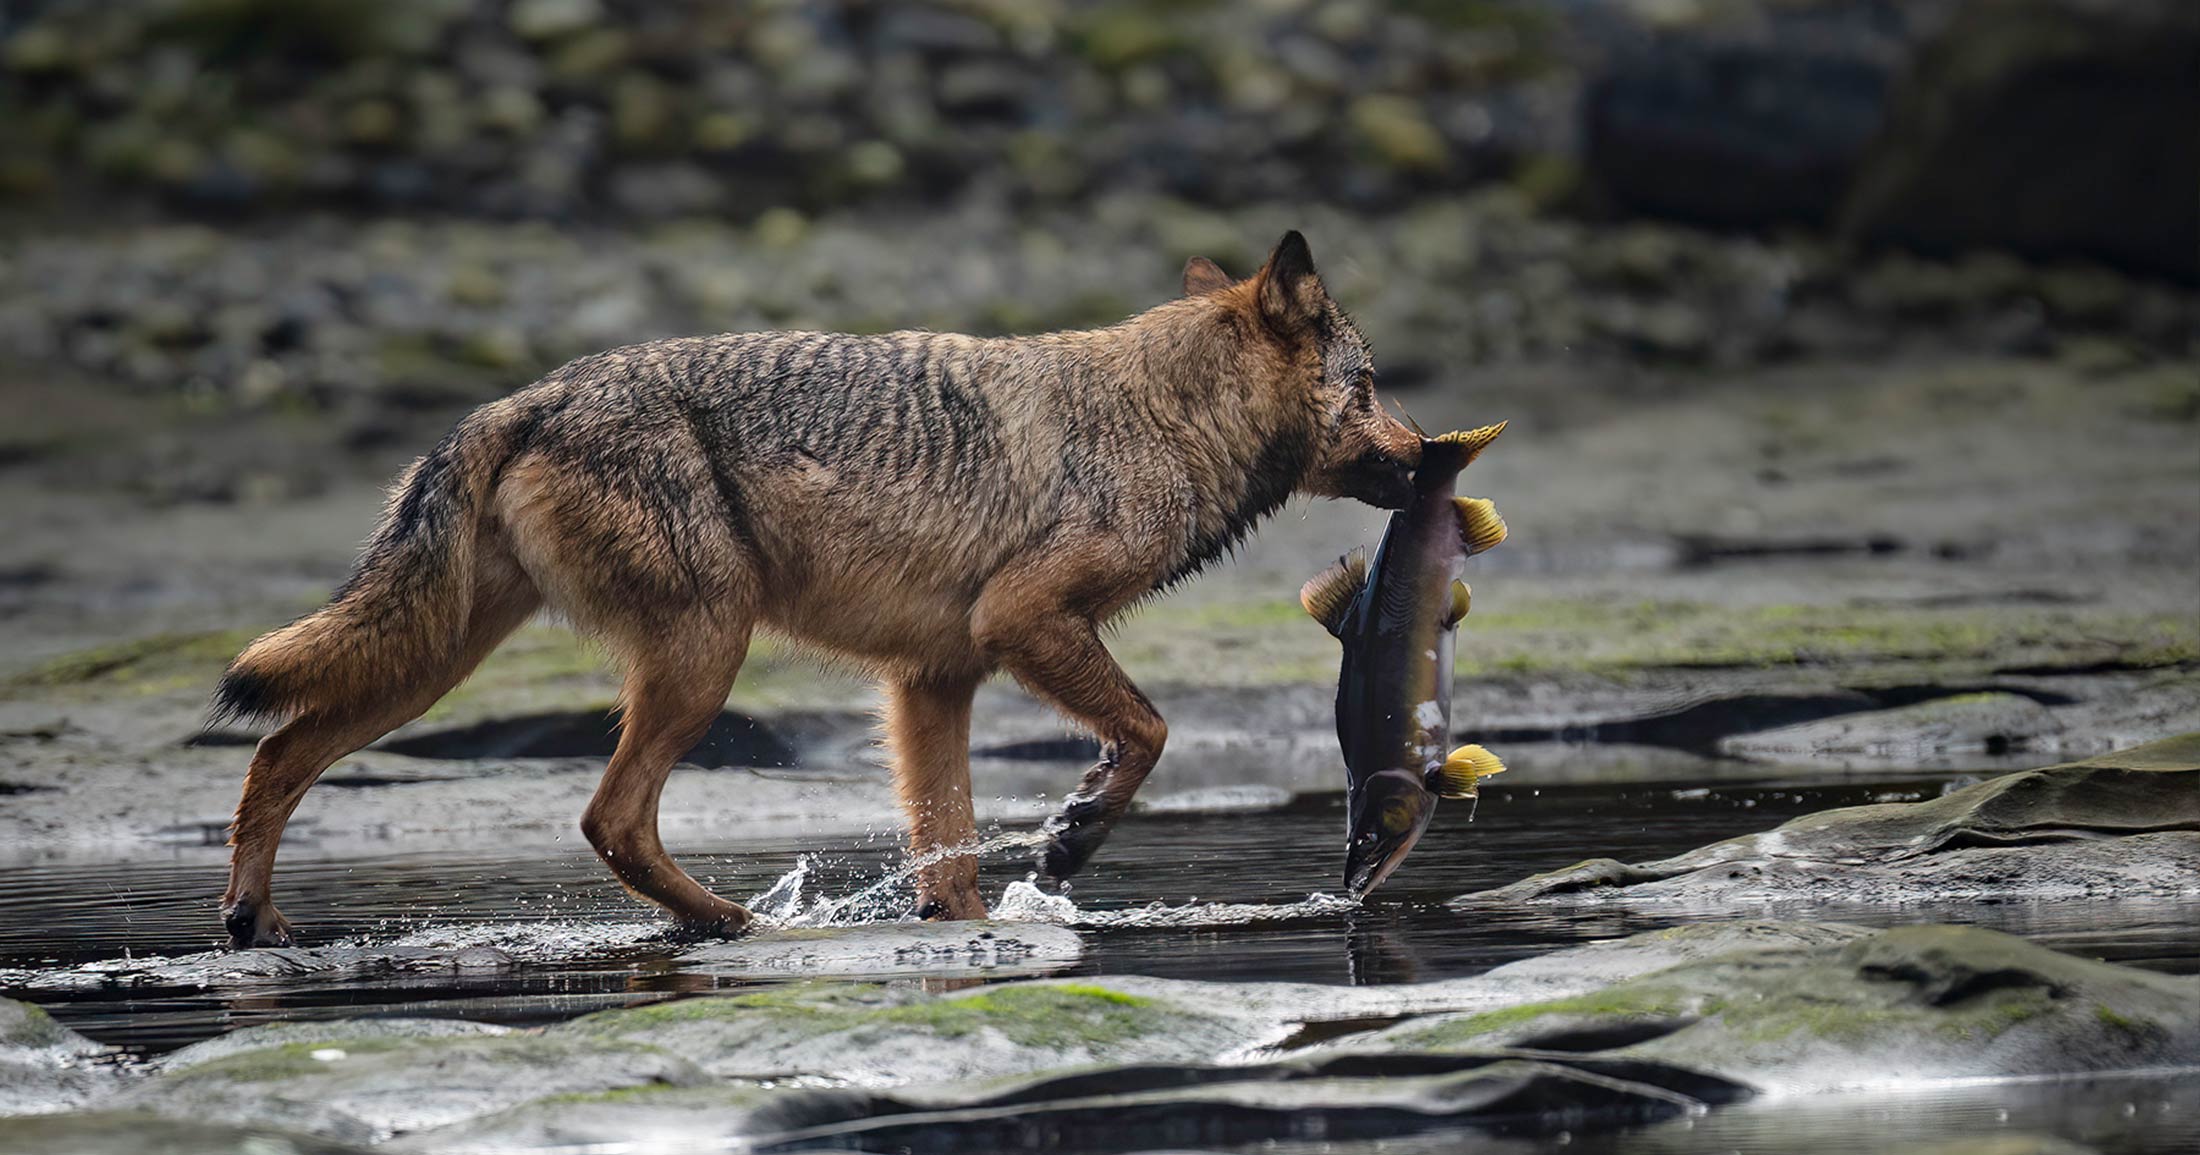 Coastal wolf with a salmon in its month.